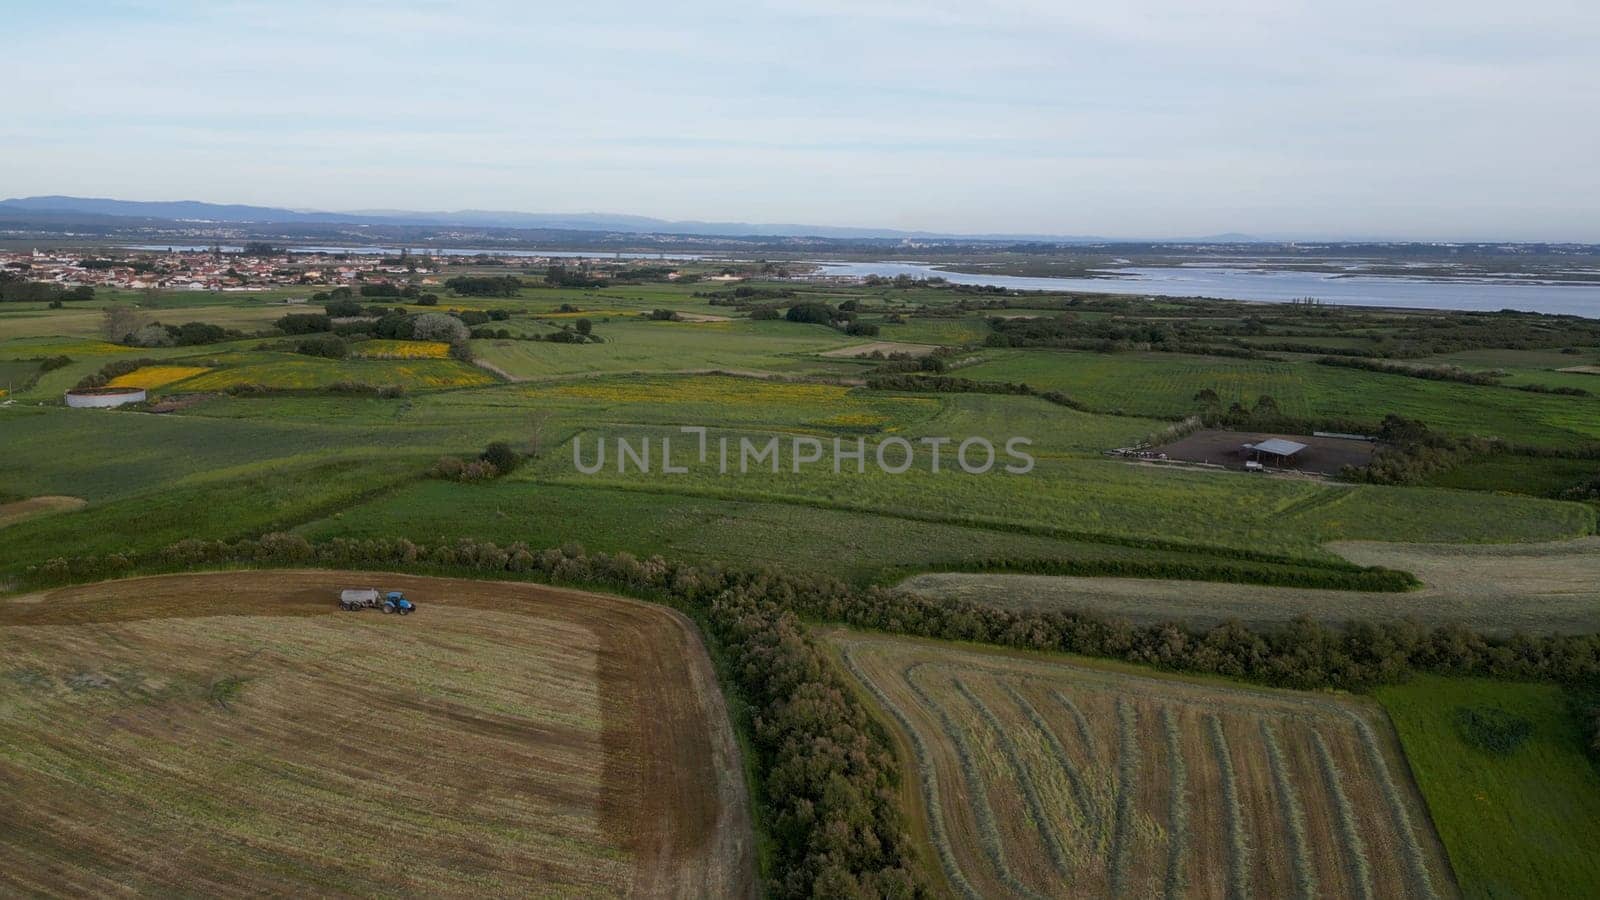 Aerial view of the cultivated fields of the estuary in Murtosa, Aveiro - Portugal.